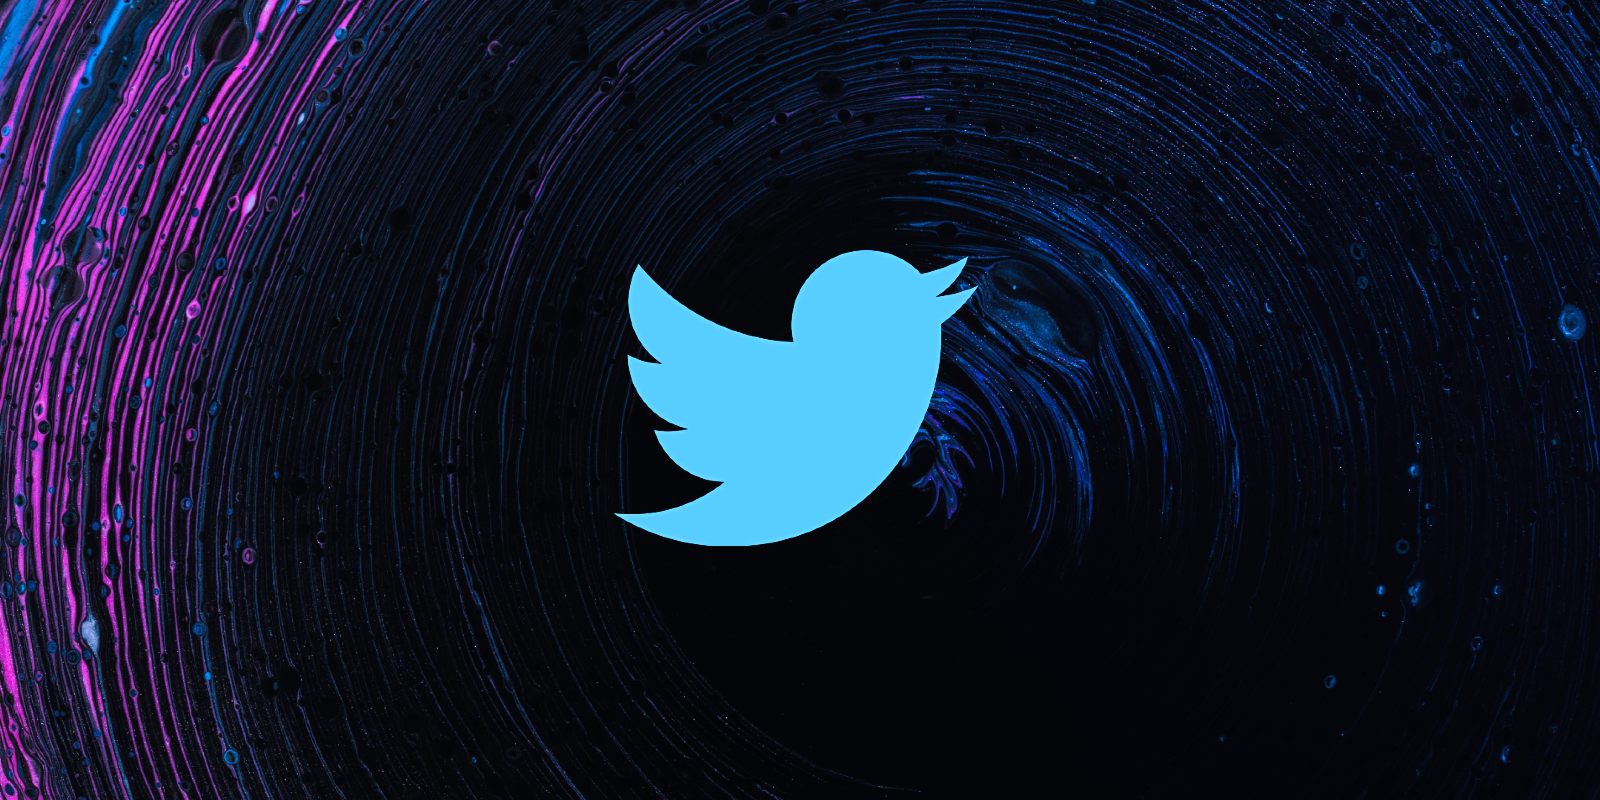 Twitter Accidentally Sends Suspicious Emails Asking To Confirm Accounts